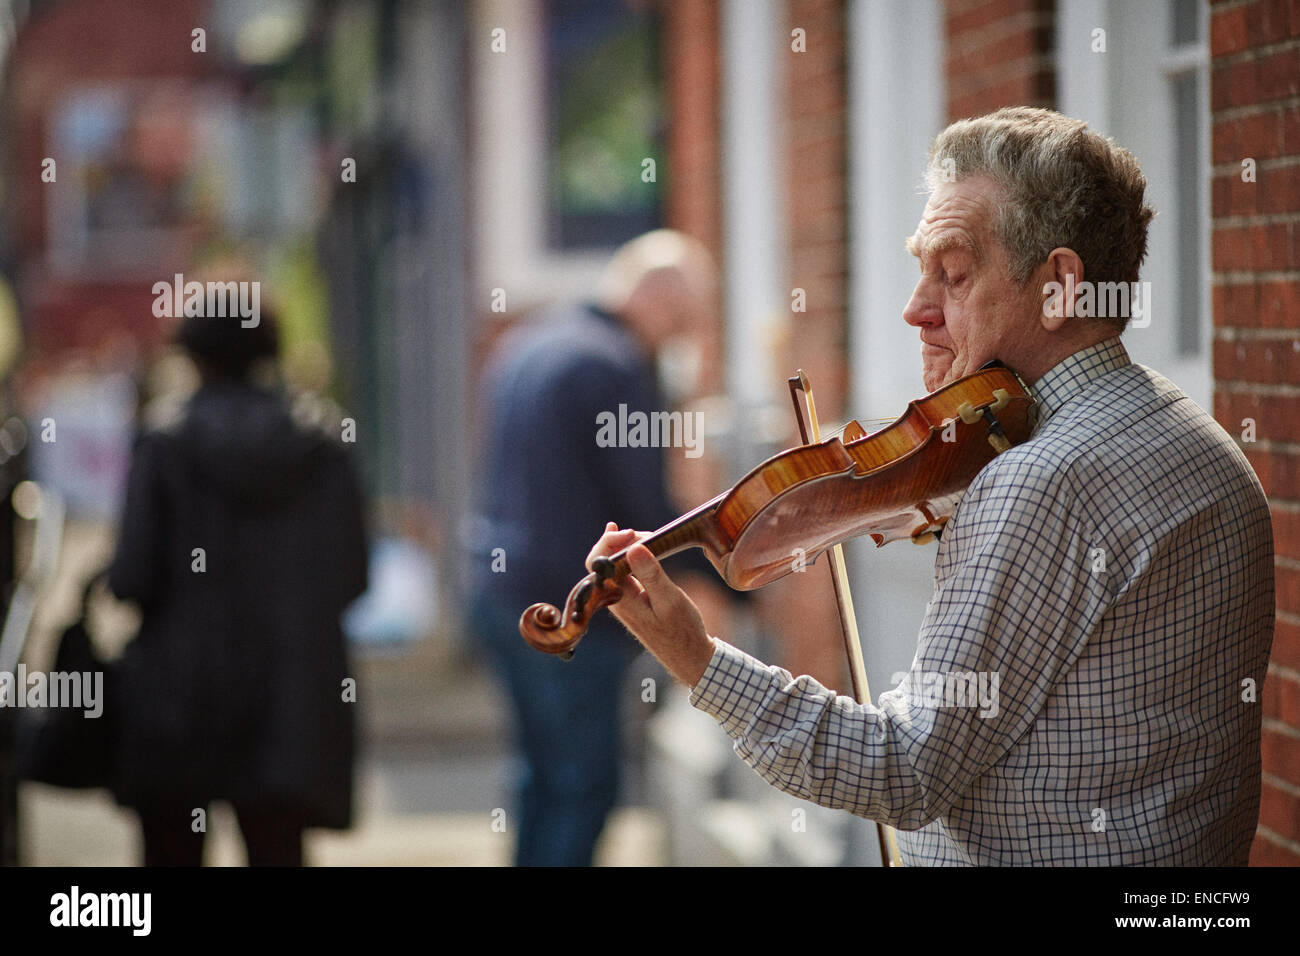 Violin playing street busker in Didsbury South manchester village Stock Photo